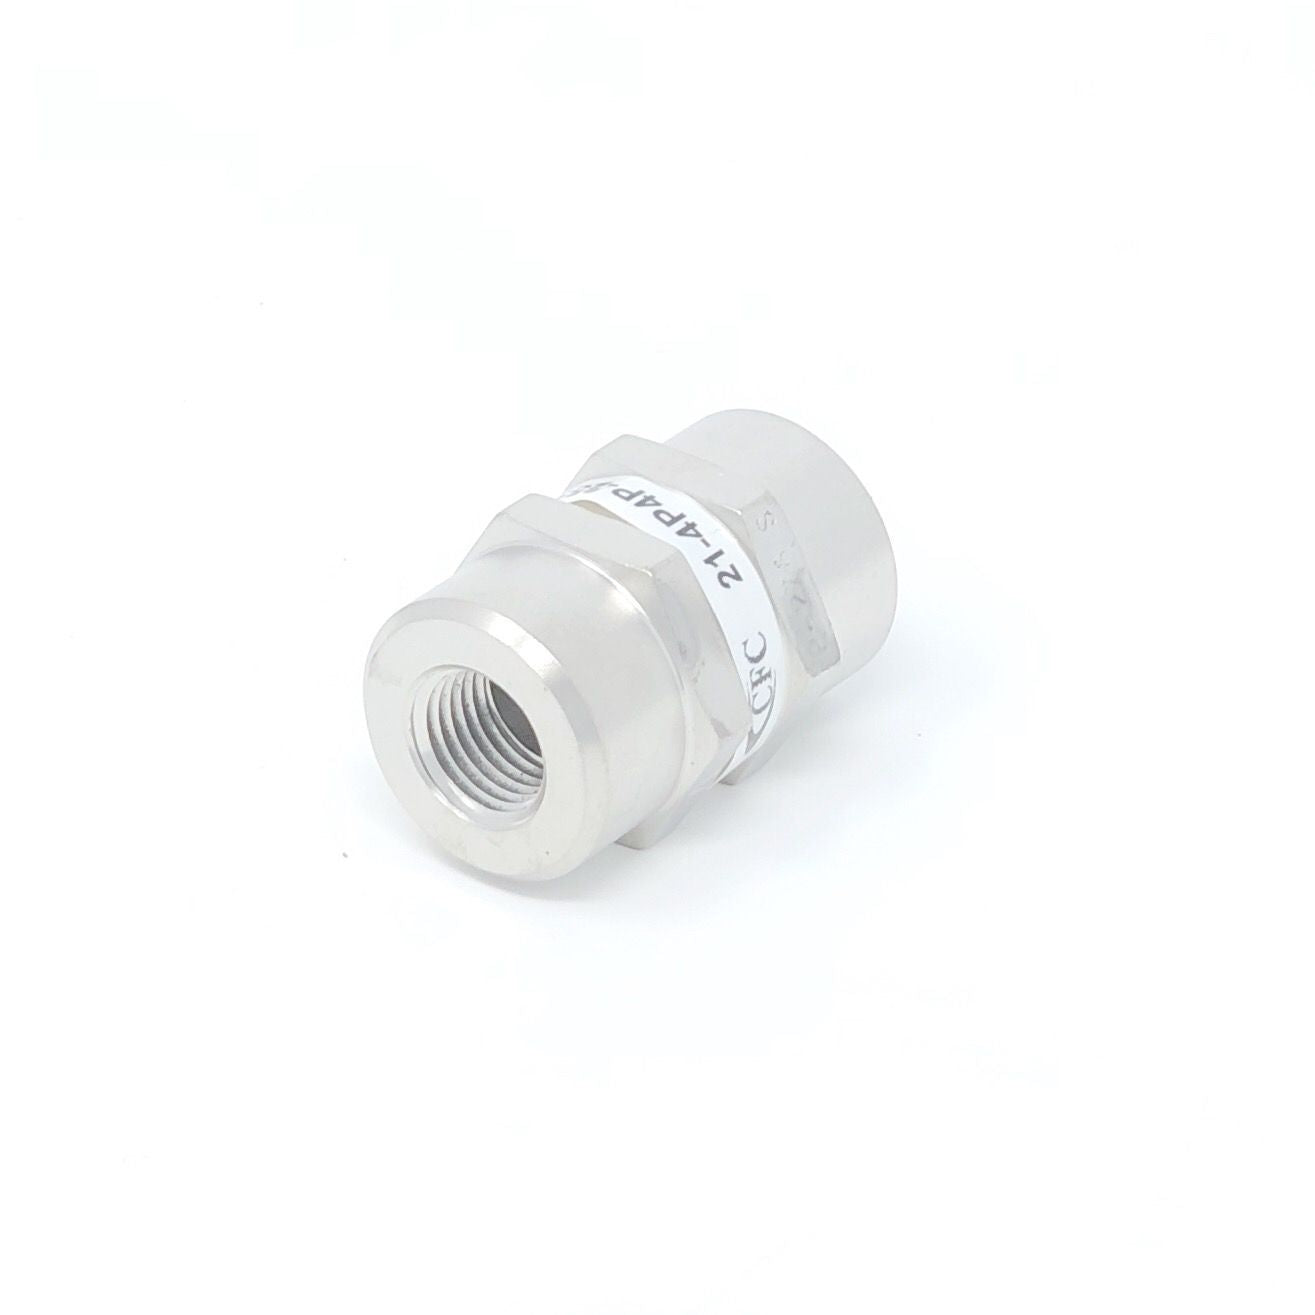 21-12S12S-10S : Chase High Pressure Inline Filter, 3000psi, #12 SAE (3/4"), 10 Micron, No Visual Indicator, With Bypass